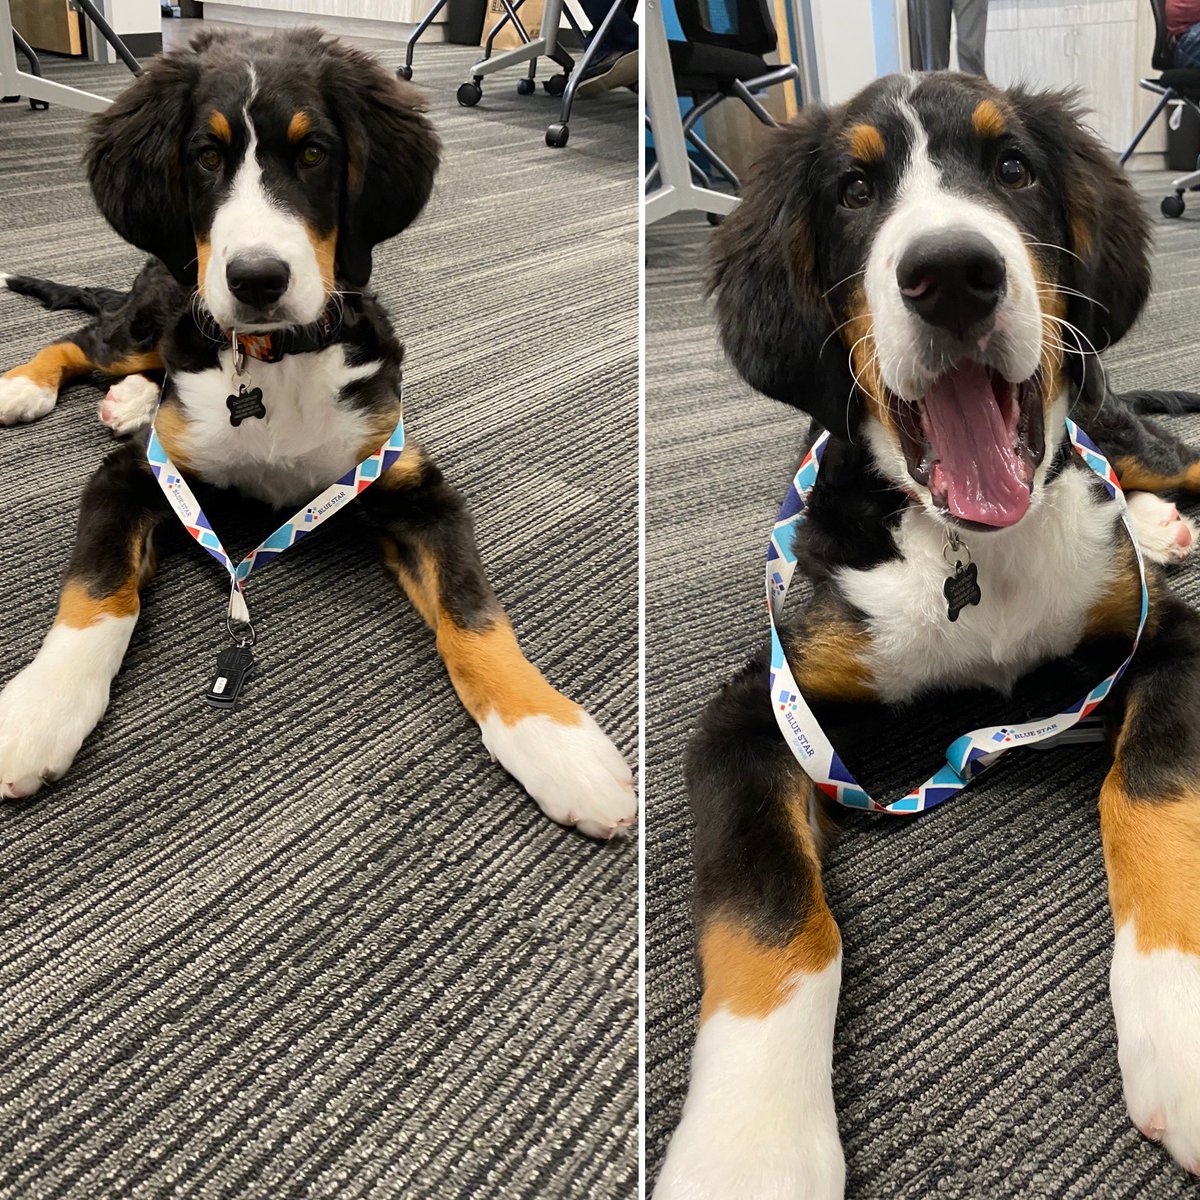 Nothing makes a rainy Thursday better than a visit from Camden!  He loves coming in with his dad so that he can get extra love and playtime with the team.  #bringyourpettowork #bluestar #cyber #lovewhereyouwork